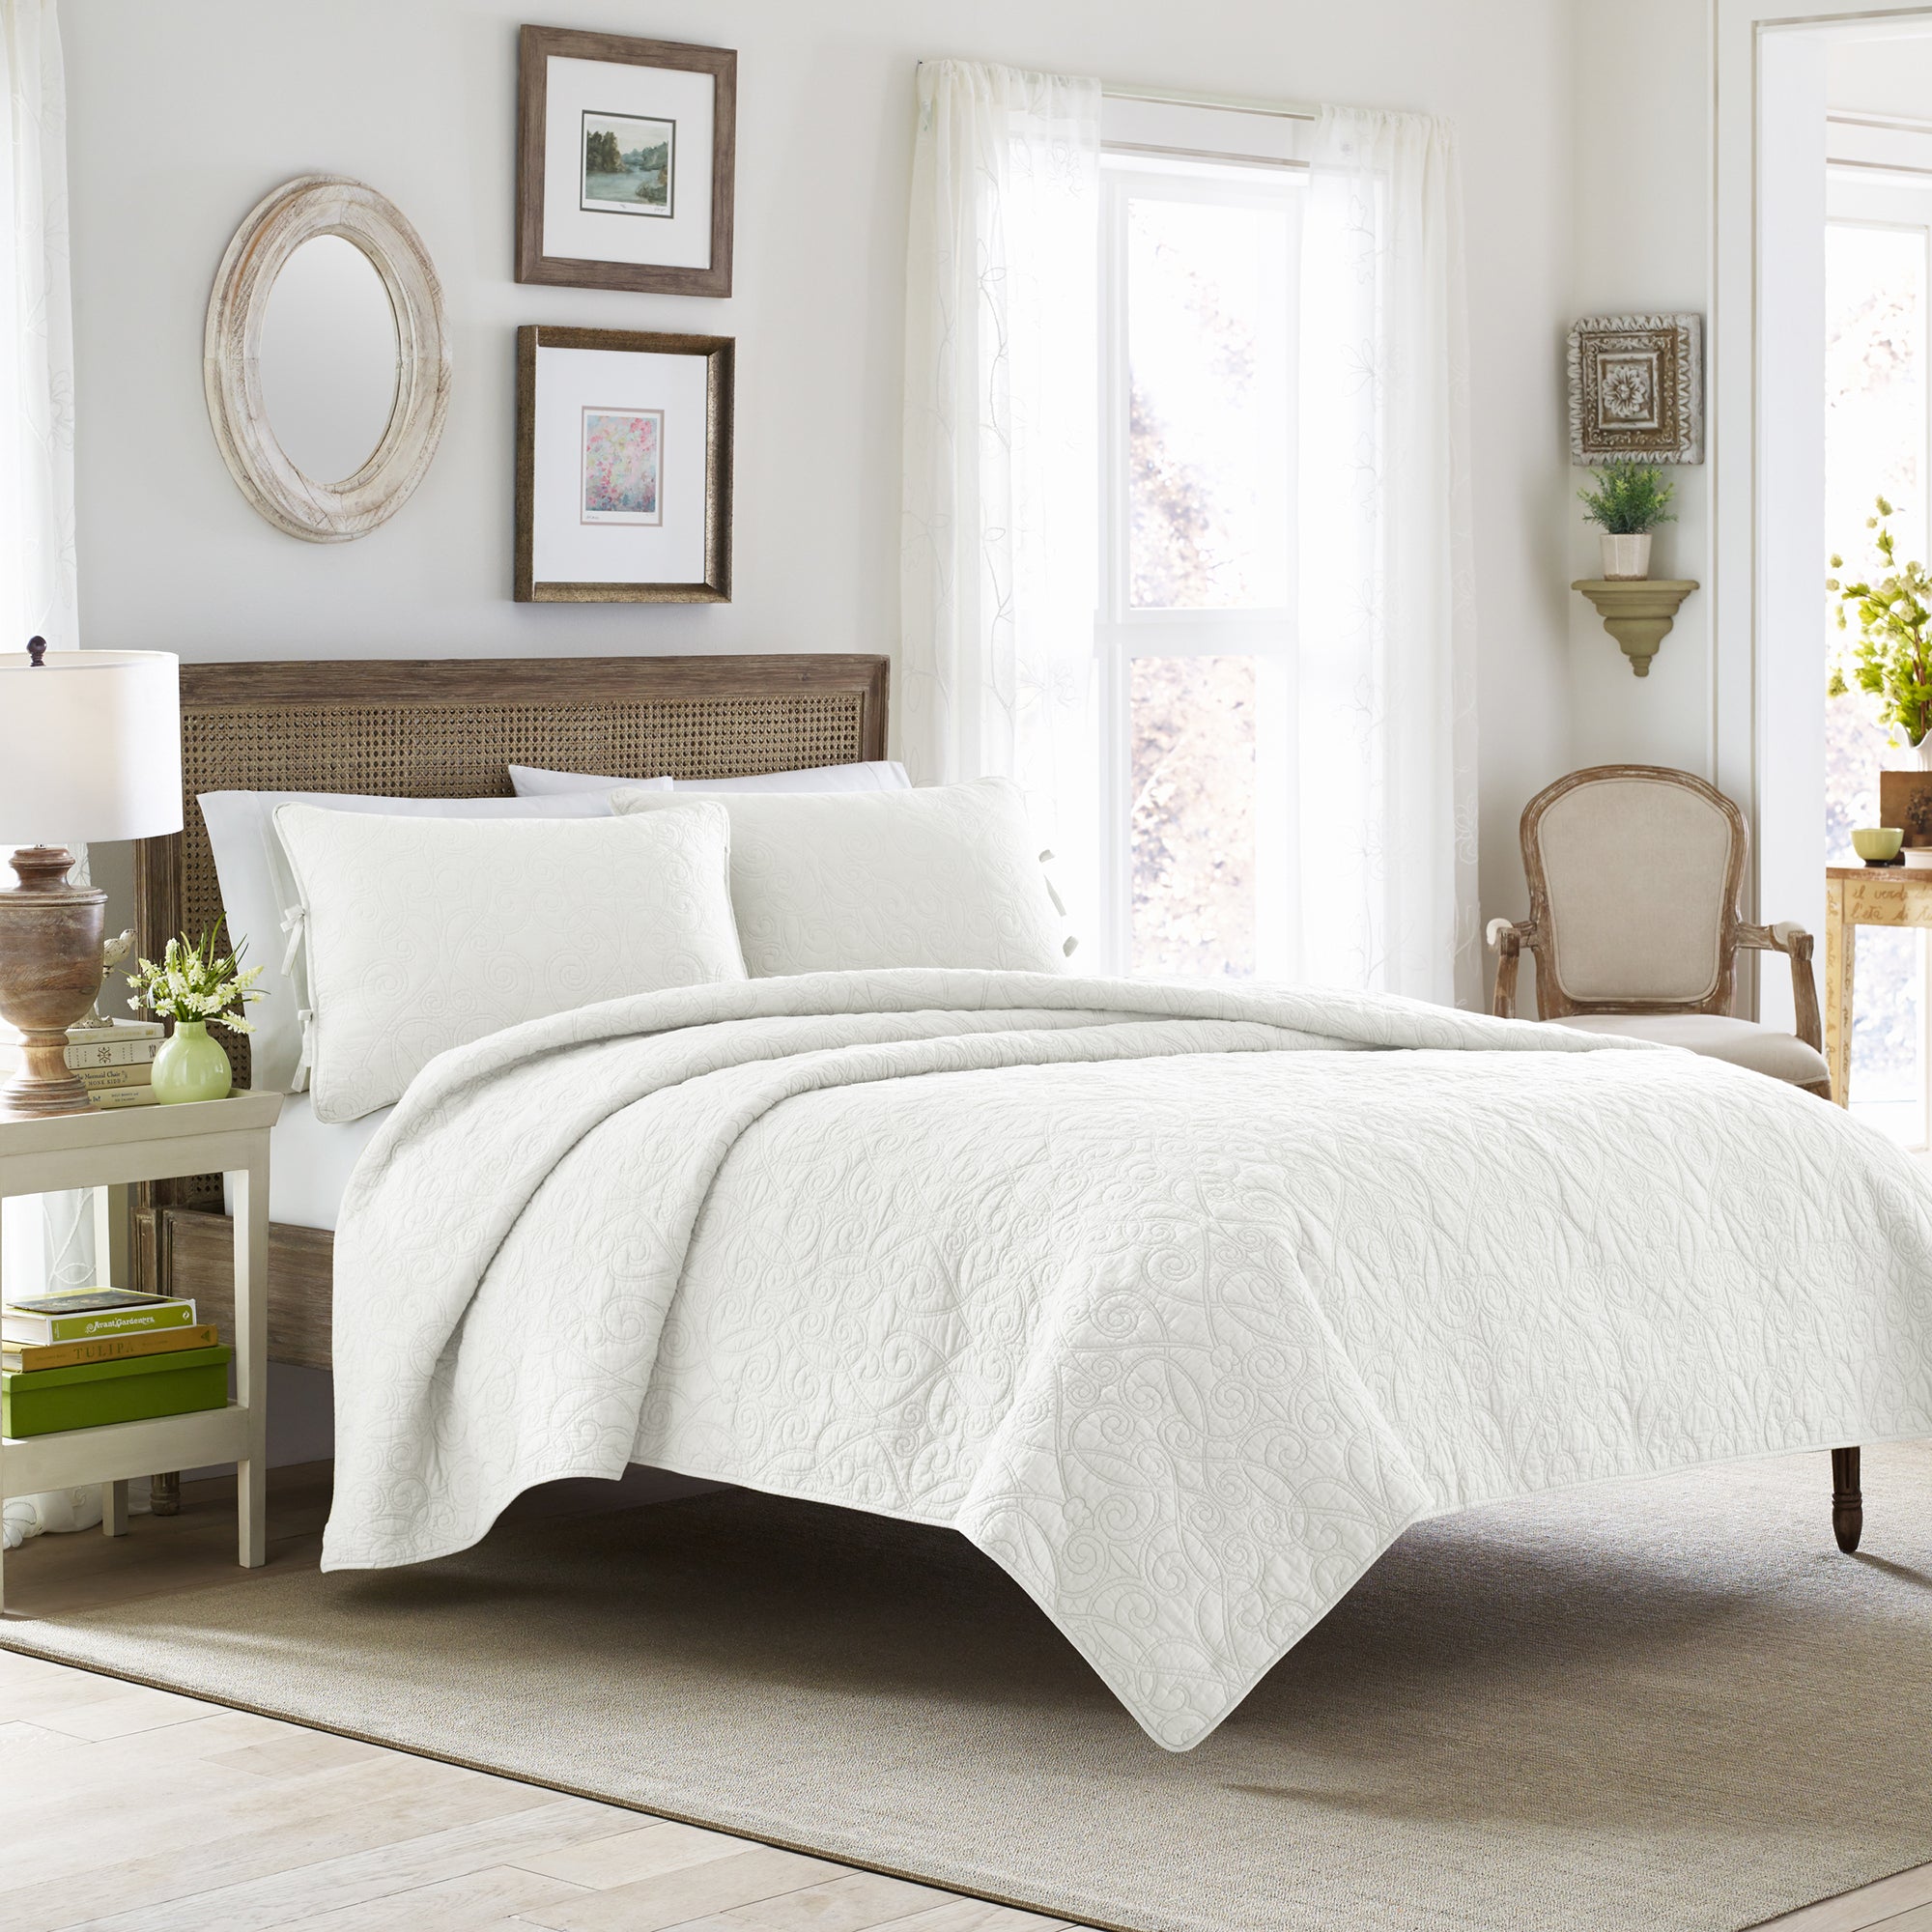 The Felicity Coverlet Set White by Laura Ashley is understated, airy and sophisticated, which will bring tranquility to any bedroom. 